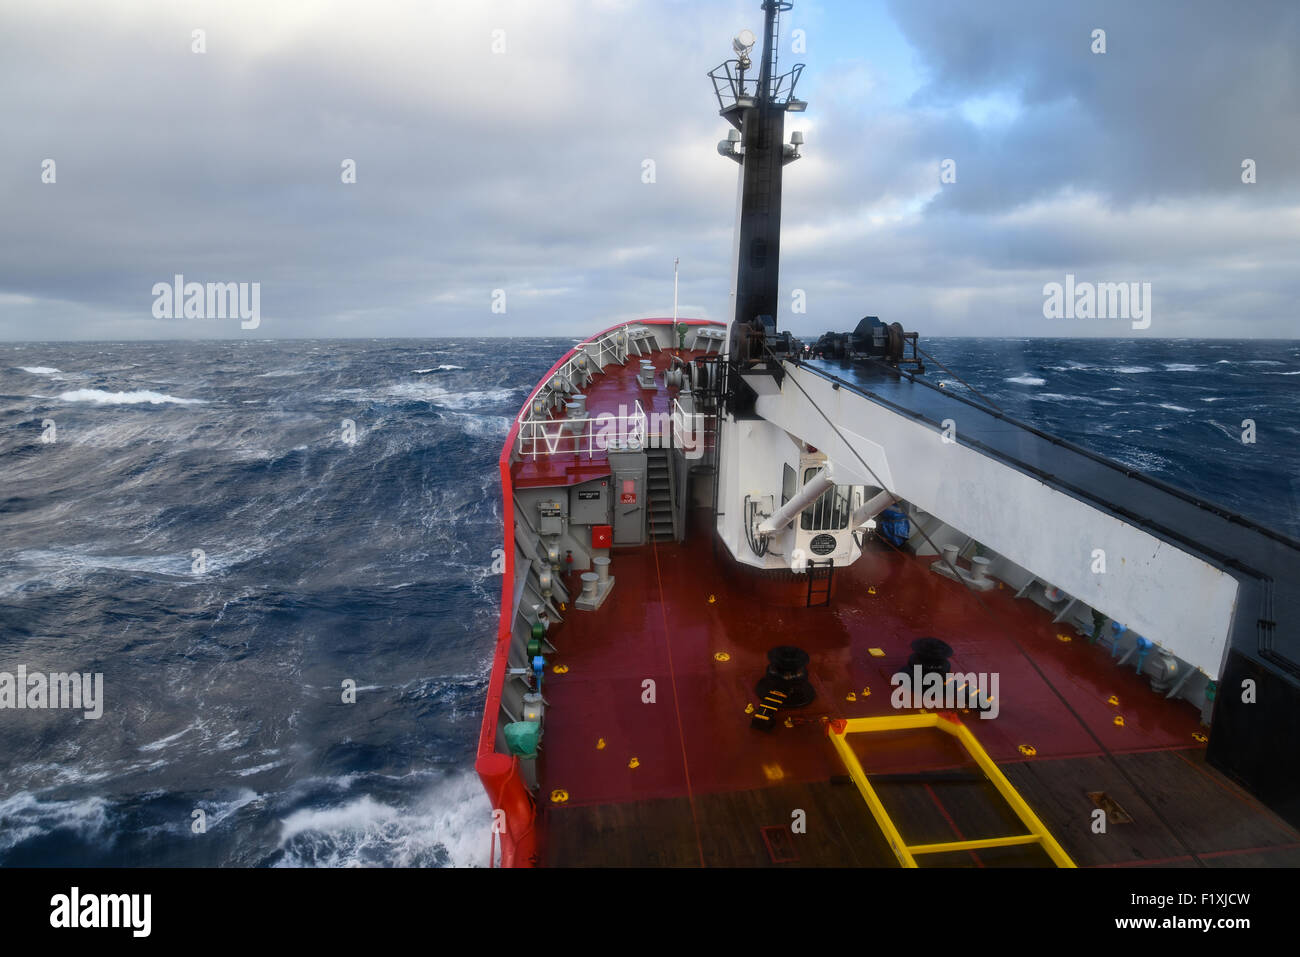 Fishery Patrol vessel MV Pharos S.G. heading into rough weather in the South Atlantic. Stock Photo